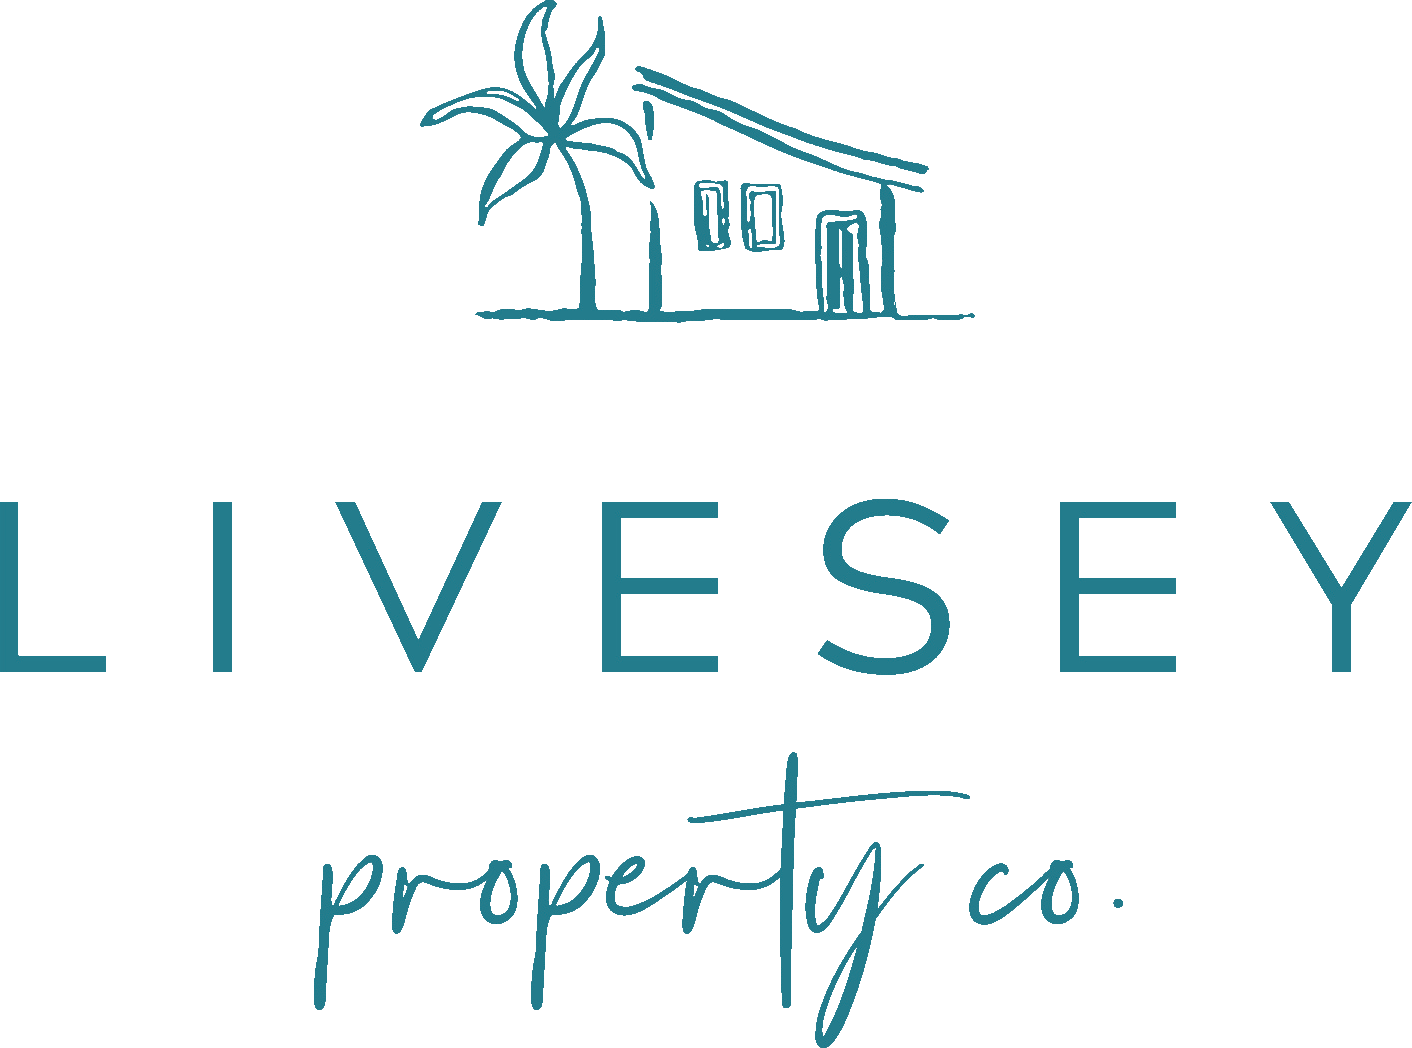 Real Estate Agency Livesey Property Co. - TEWANTIN